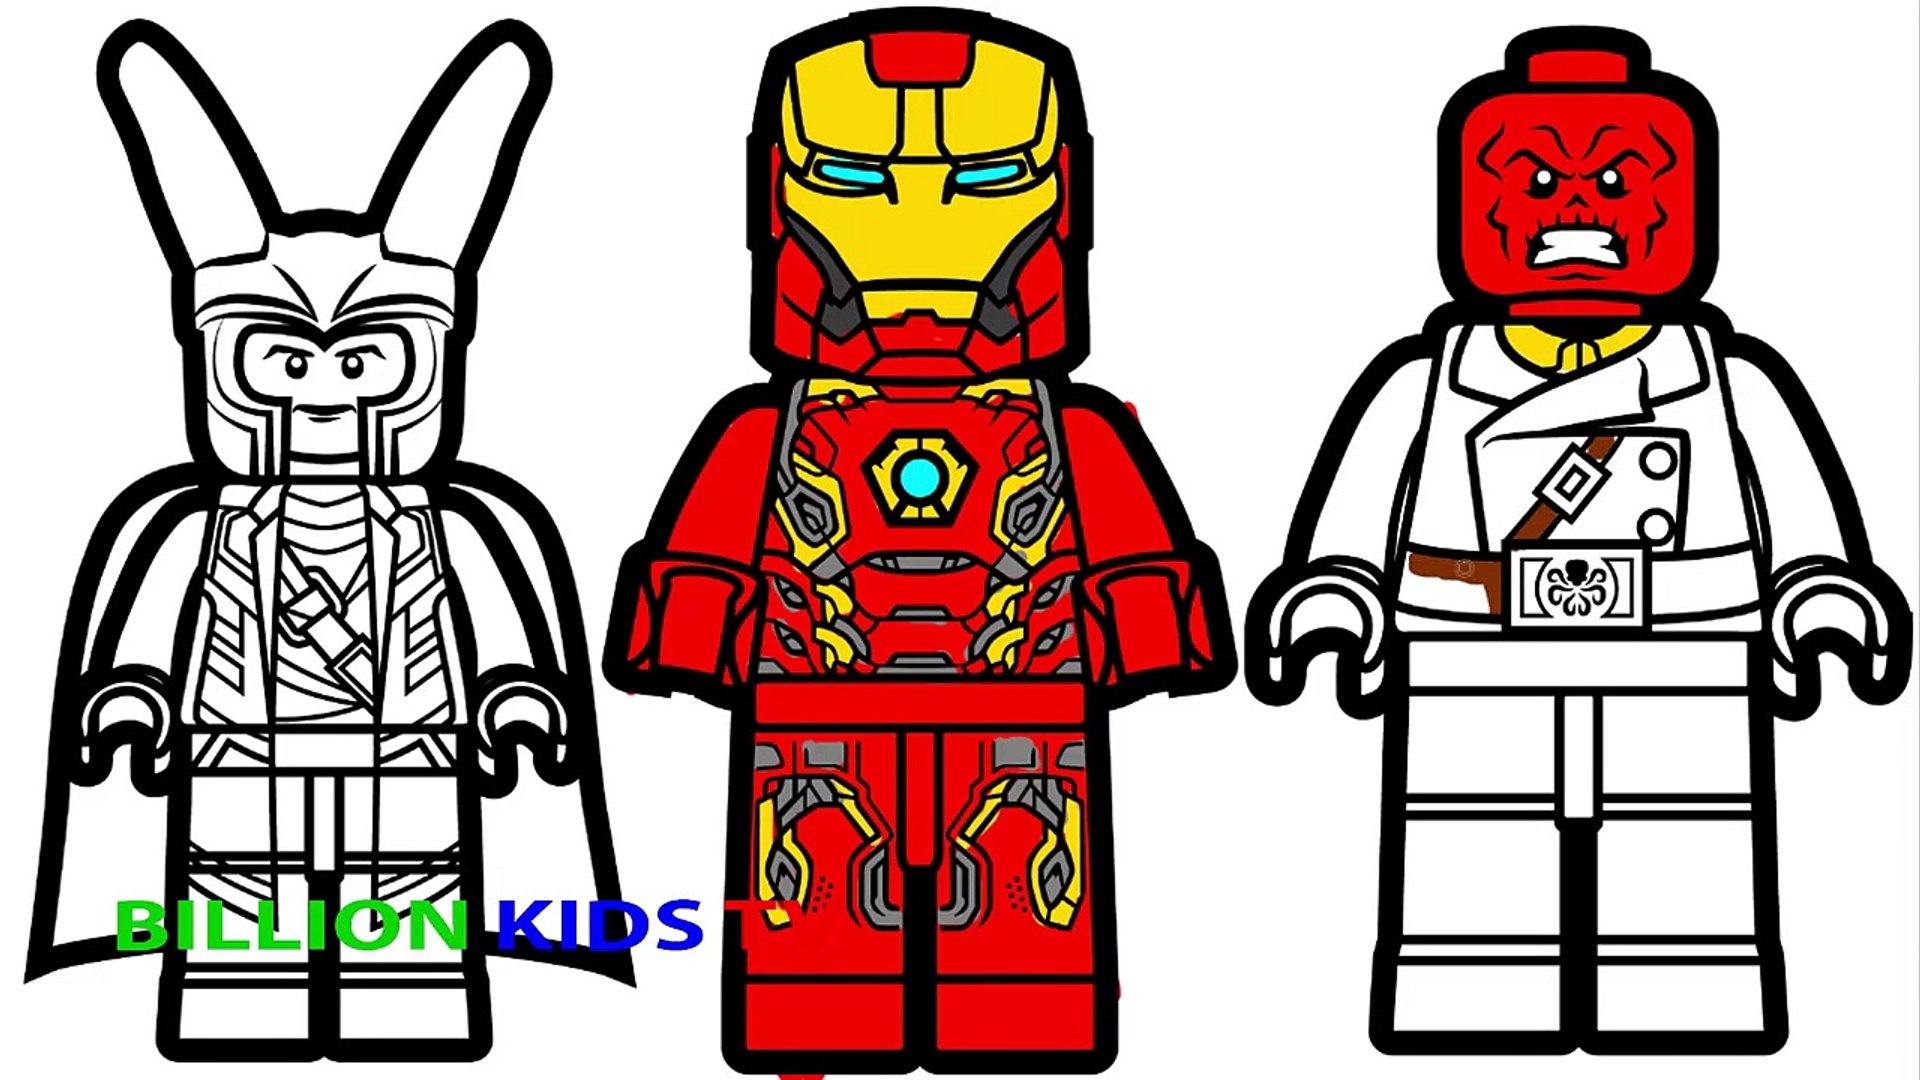 Lego Iron Man vs Loki vs Lego Red Coloring Pages Coloring Book Kids Art - Dailymotion